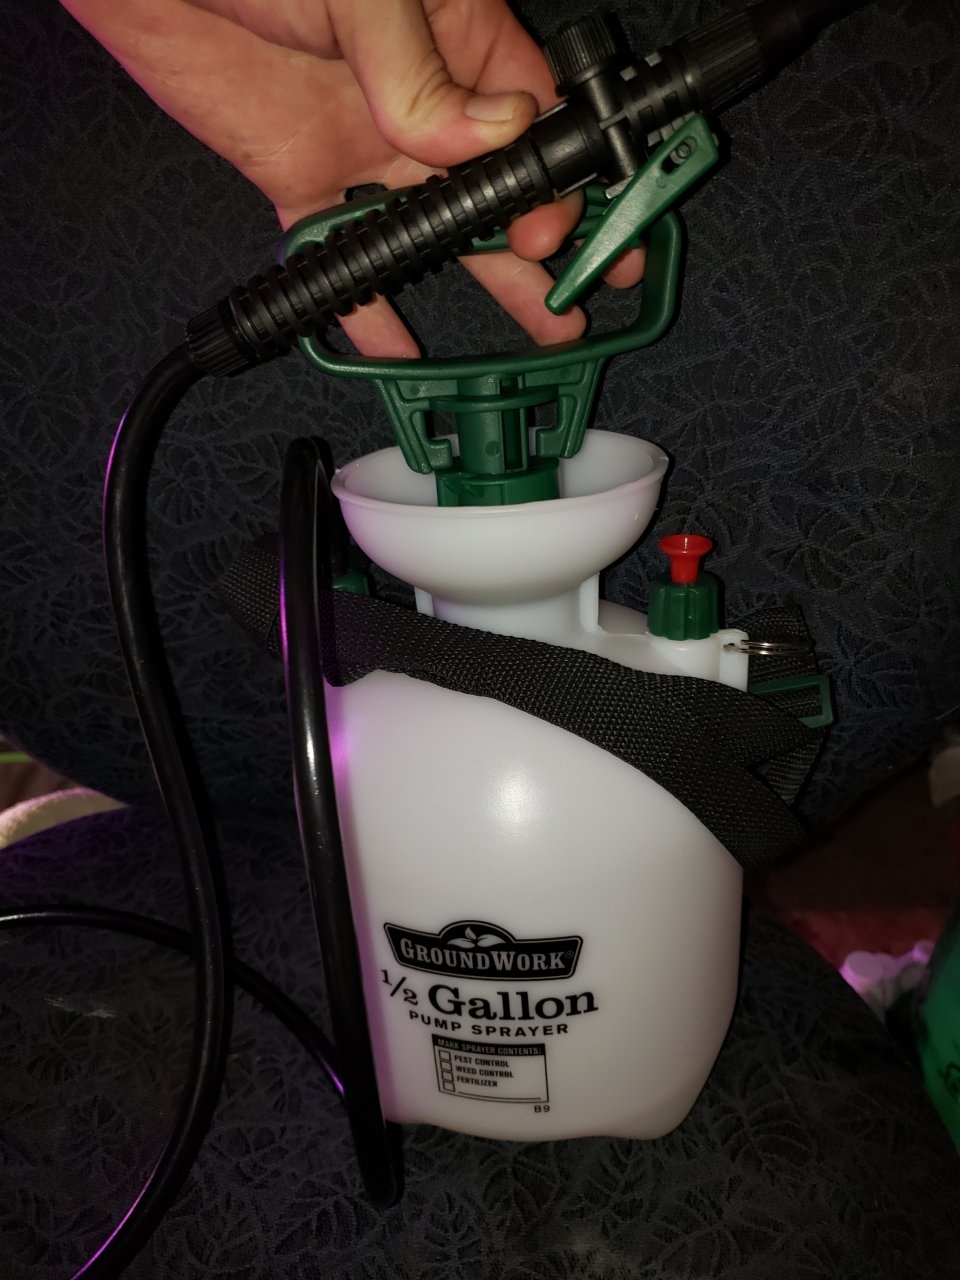 New 1/2 gal sprayer unboxed for HB plants